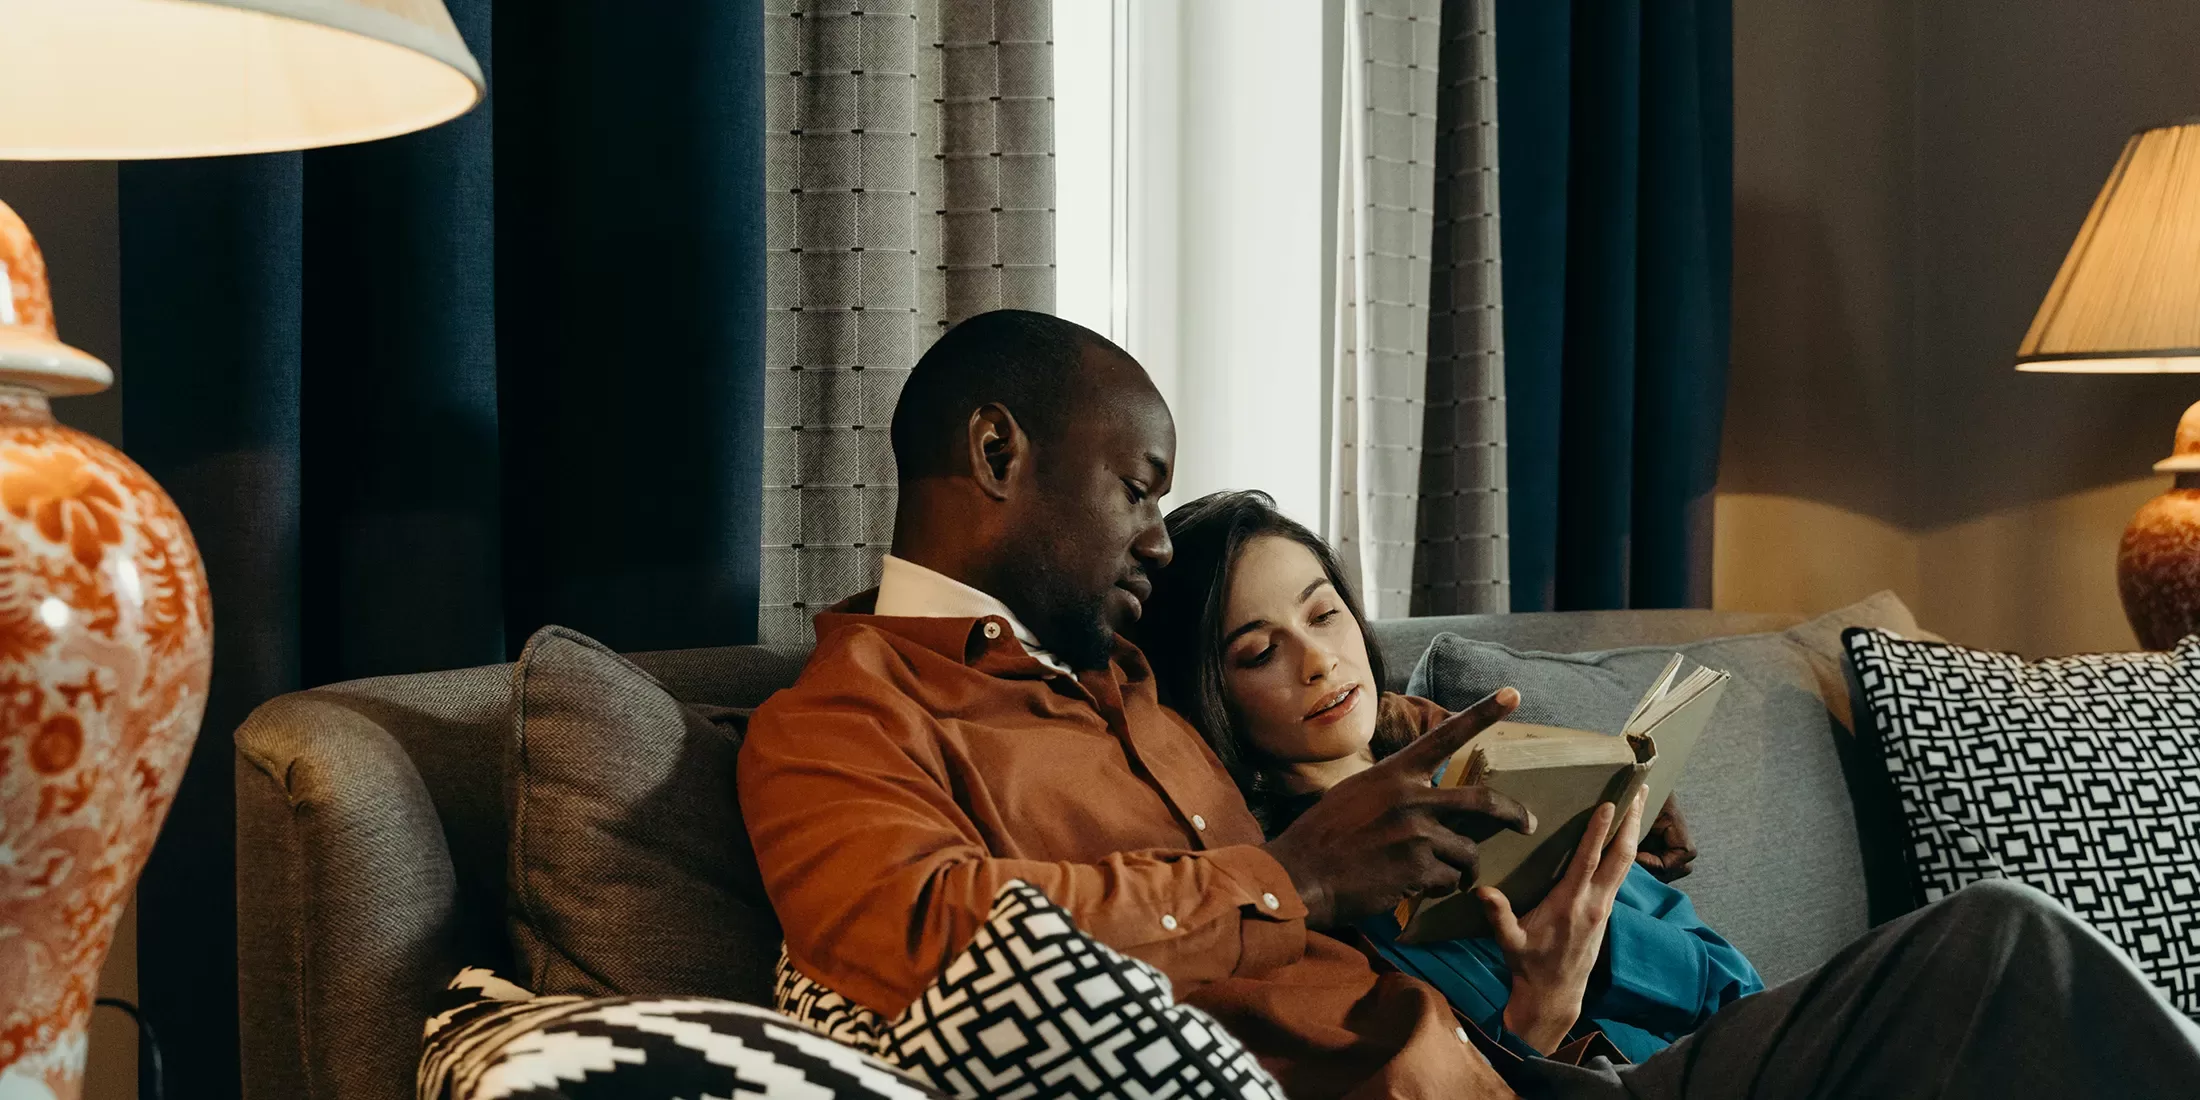 Man and women cuddling on a sofa in a living room reading a book